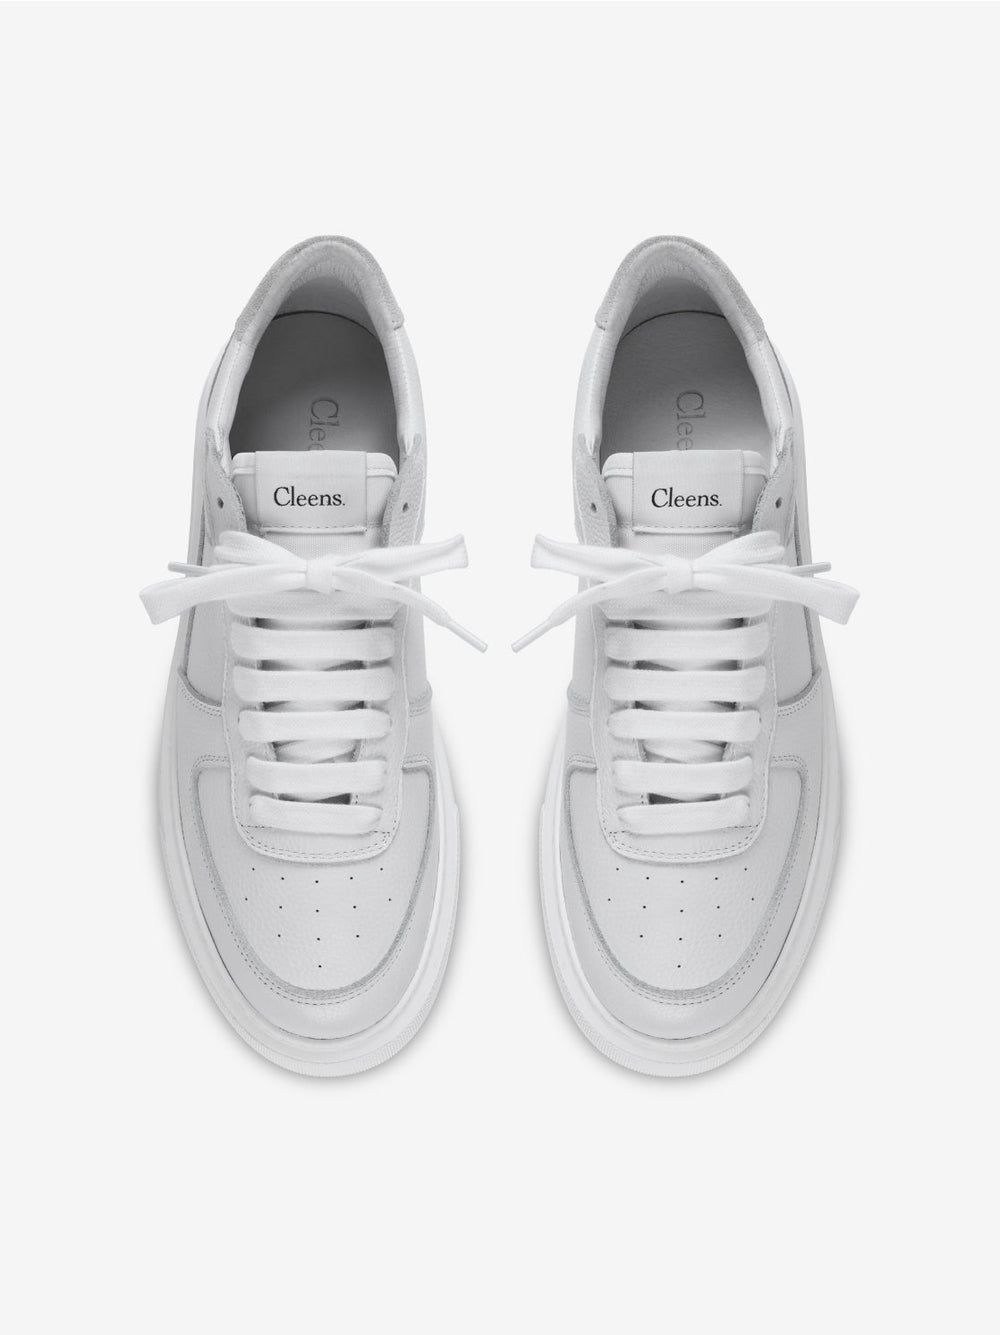 Court Trainer Triple White Tumbled leather-4